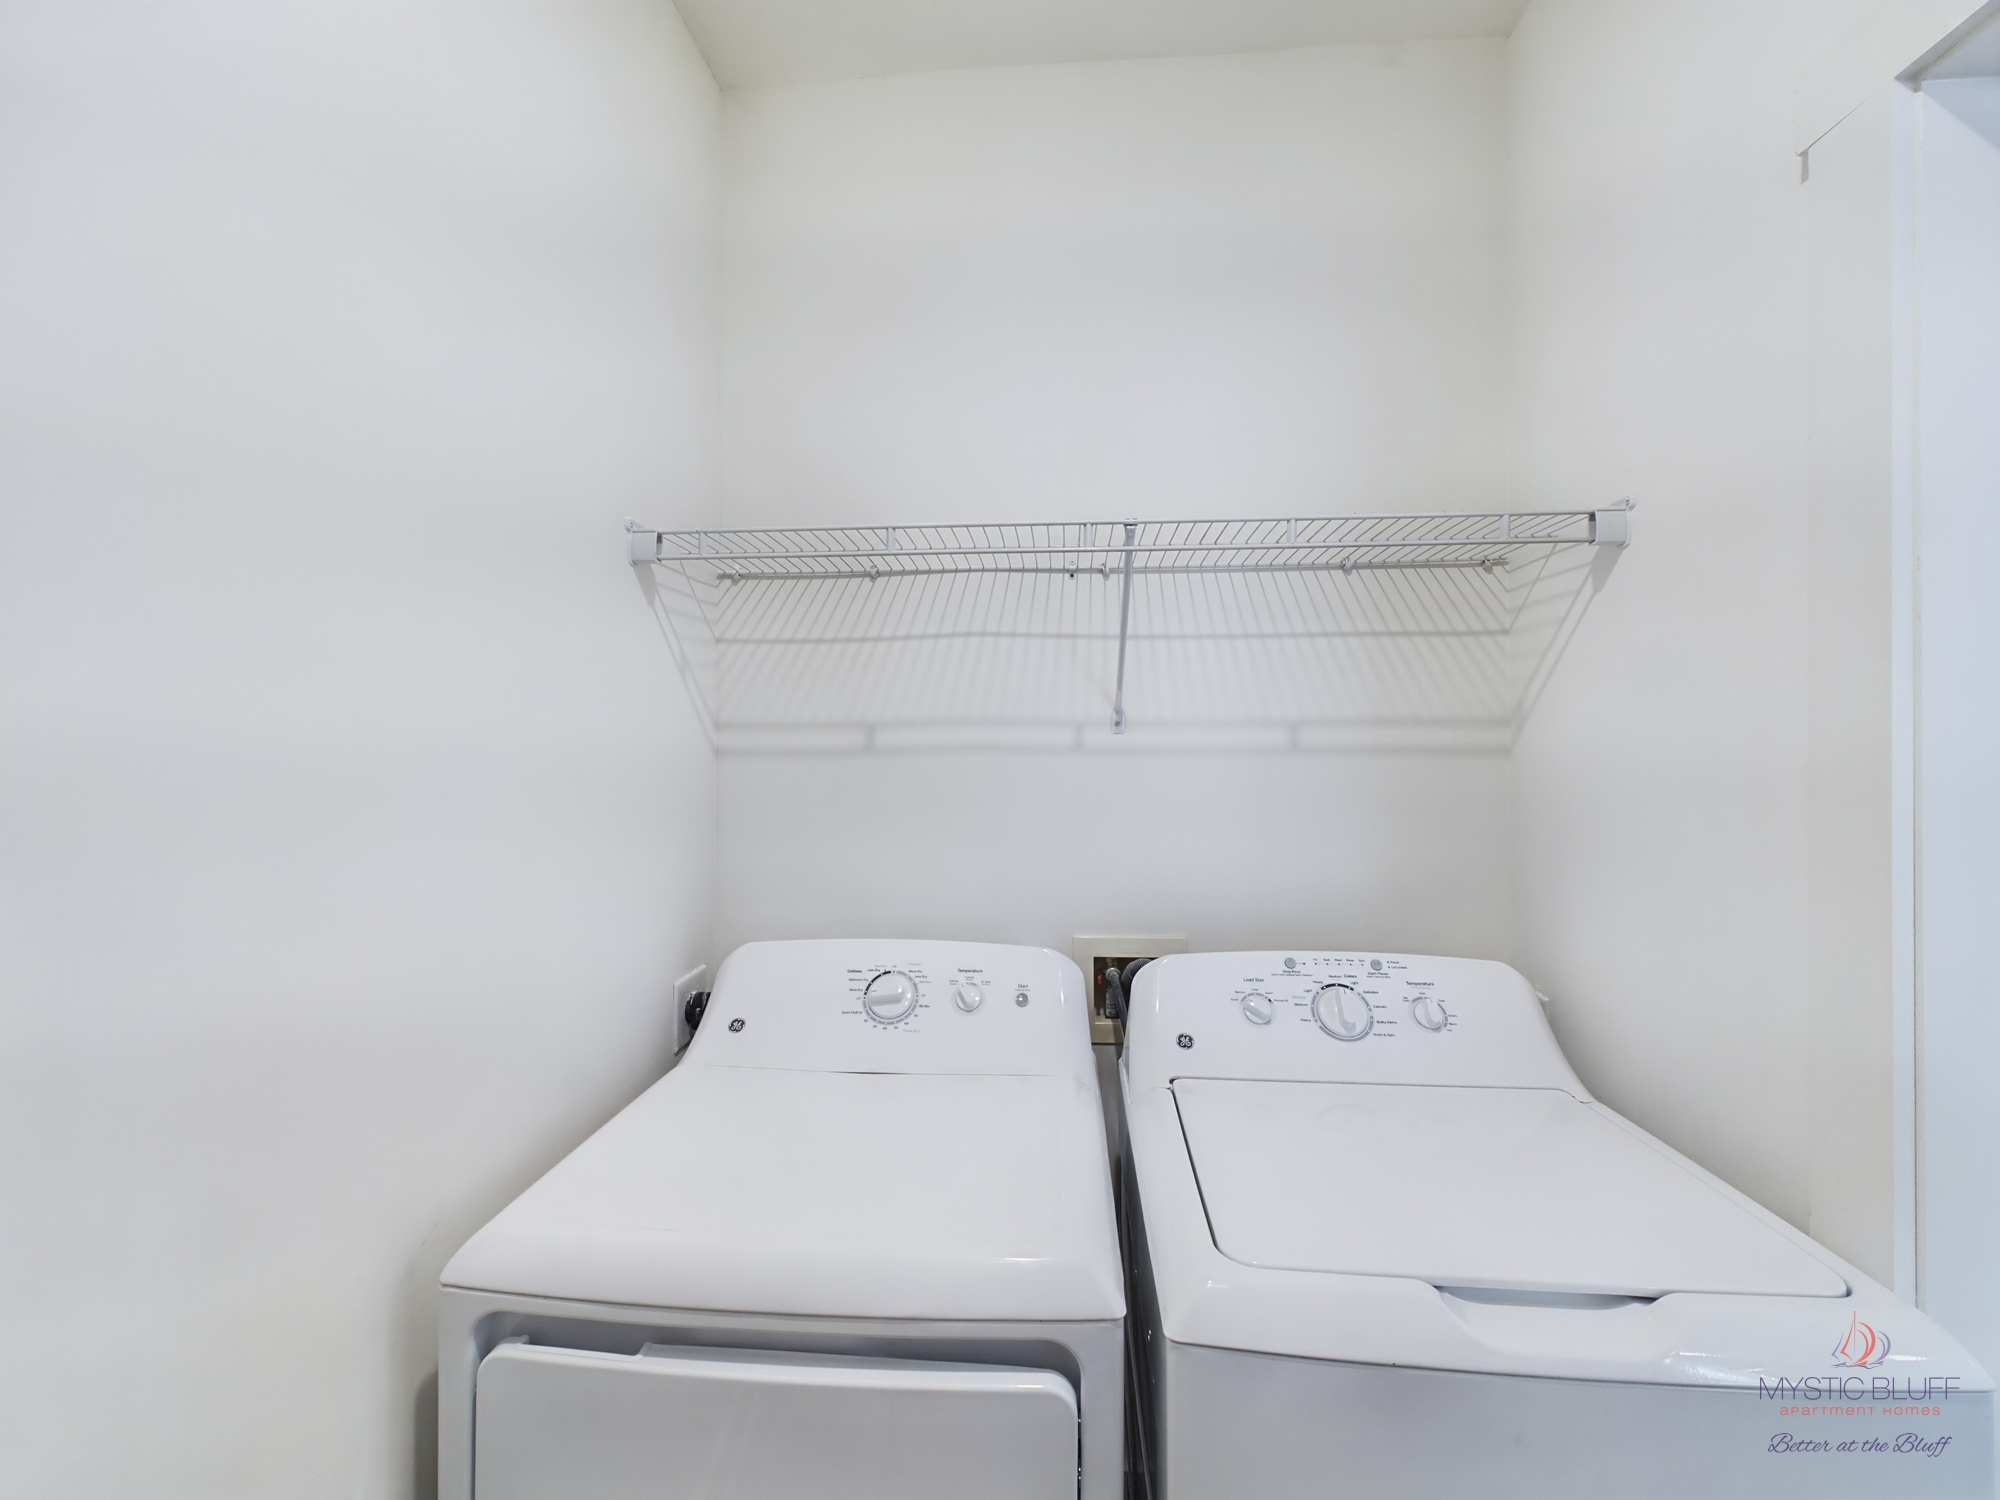 One Bedroom Apartments: A laundry room with two washers and dryers.